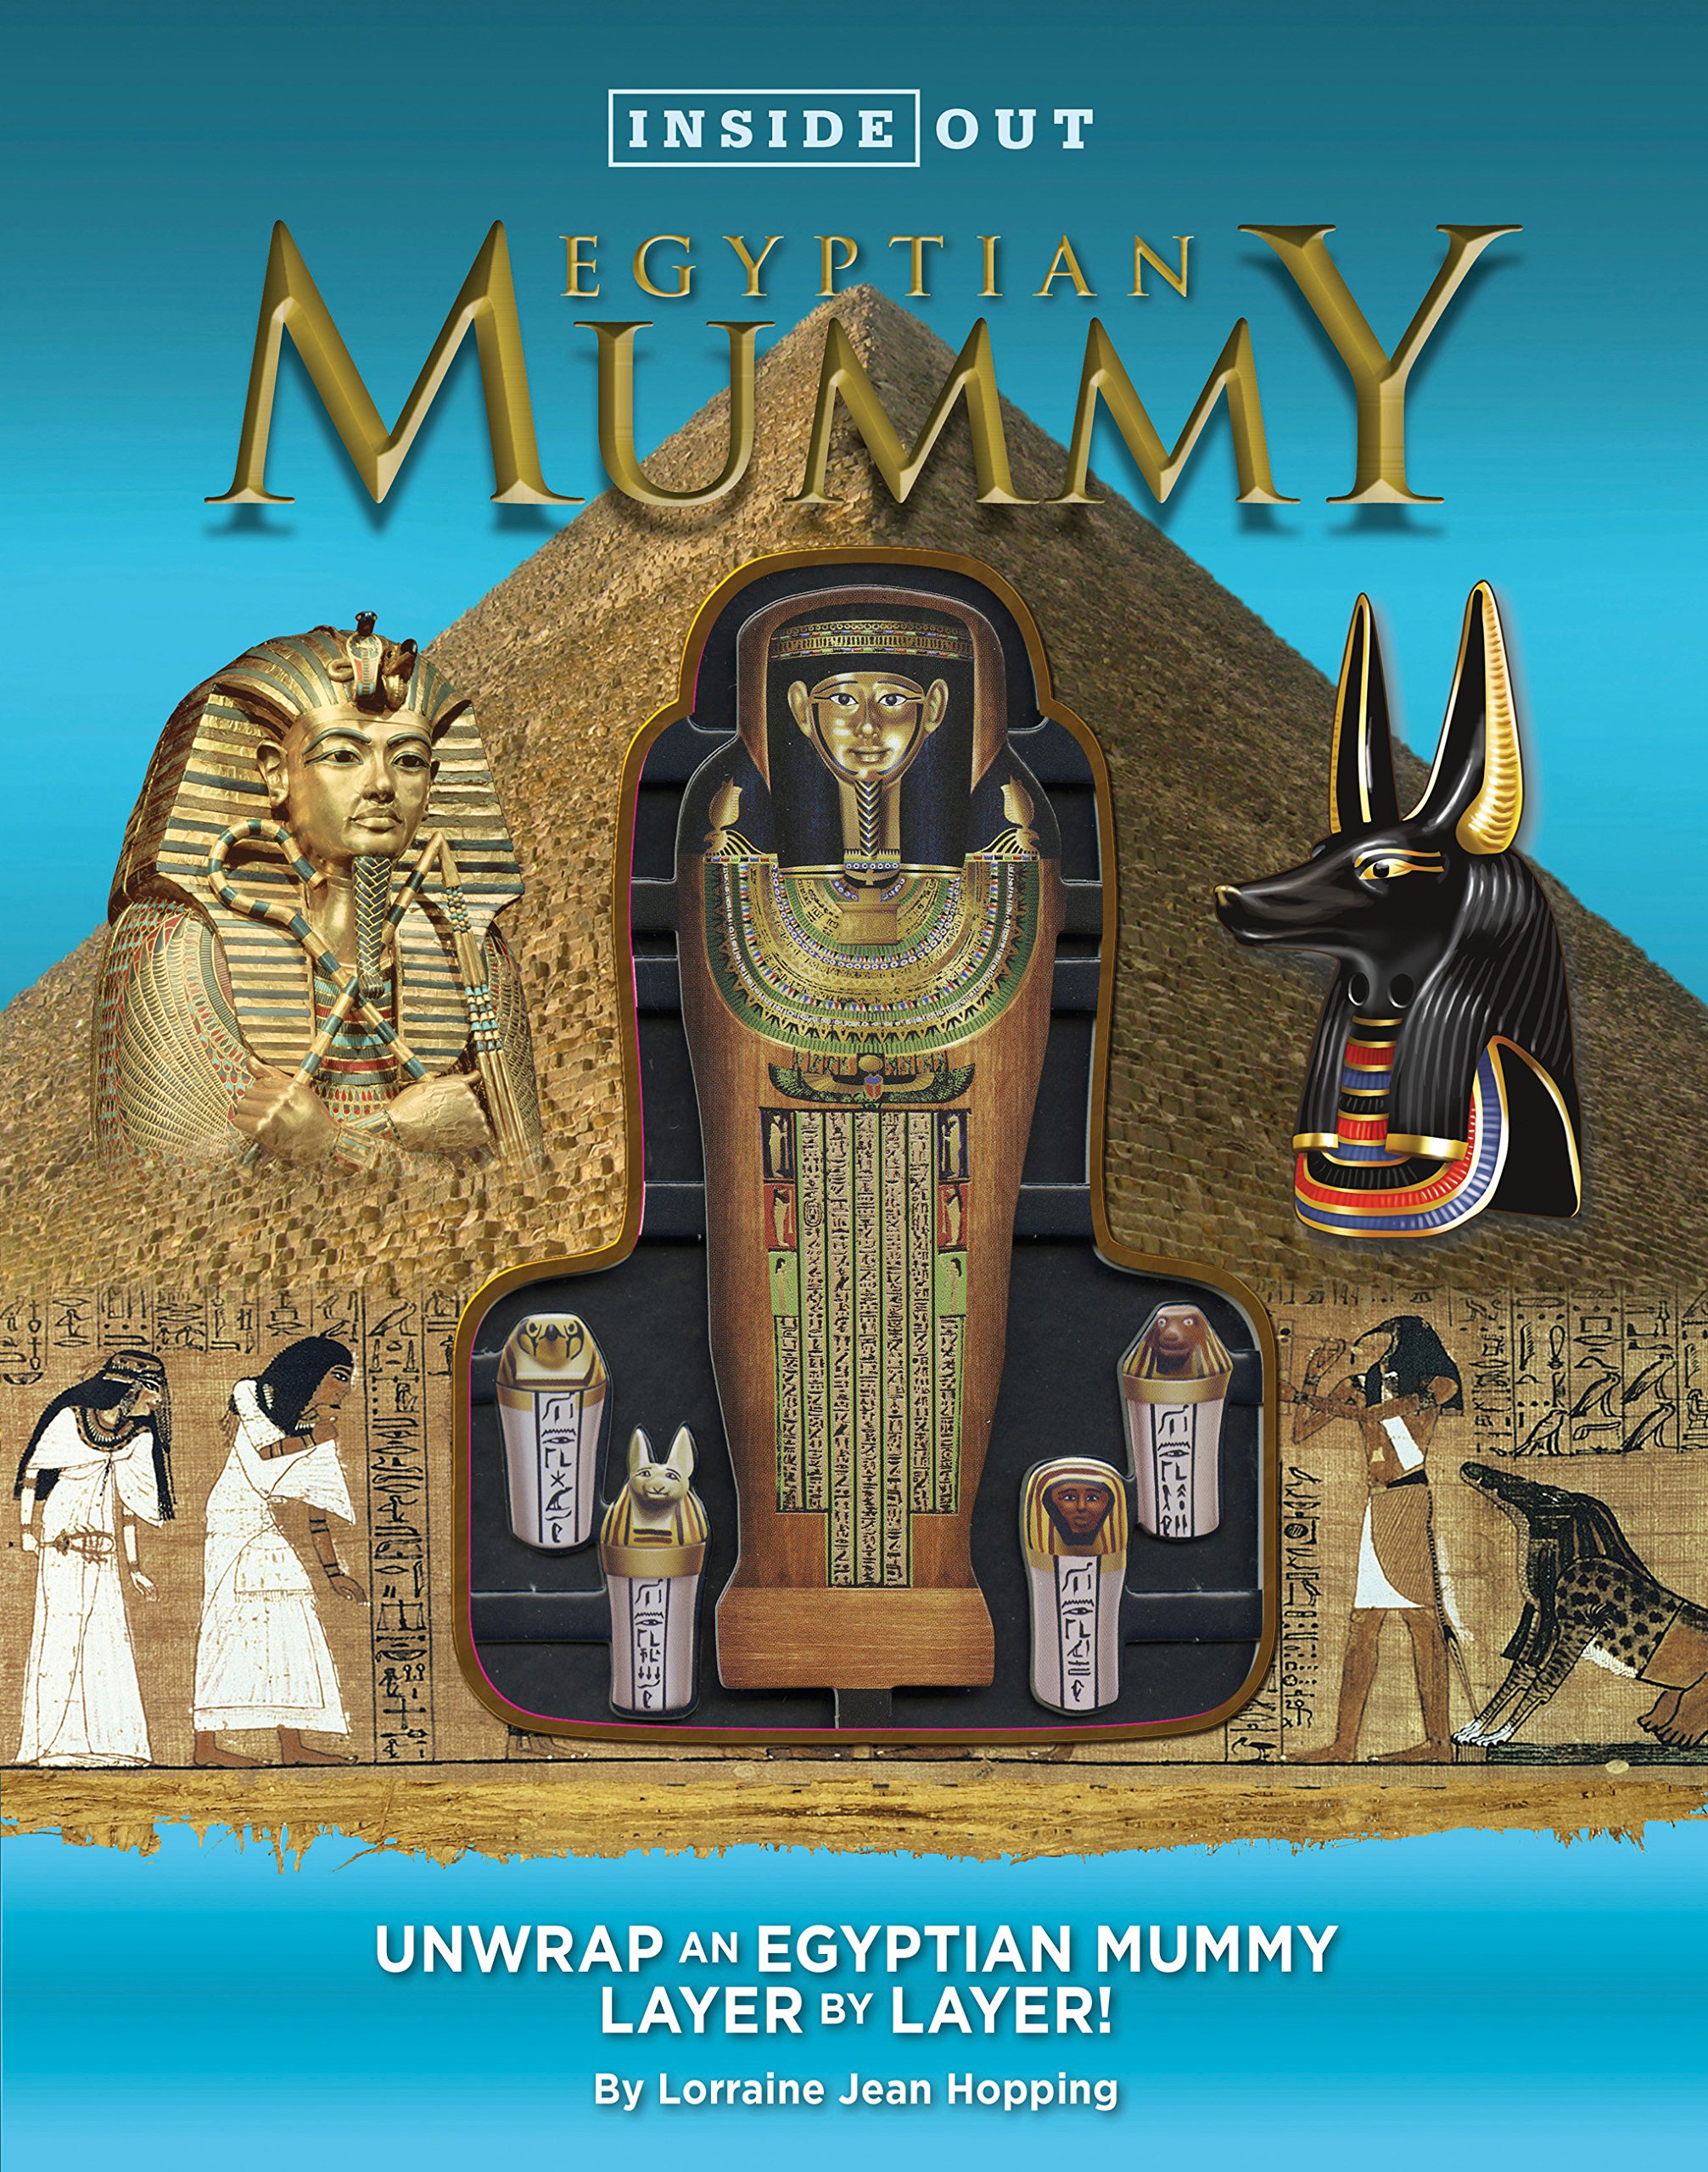 Inside Out Egyptian Mummy: Unwrap an Egyptian Mummy Layer by Layer!